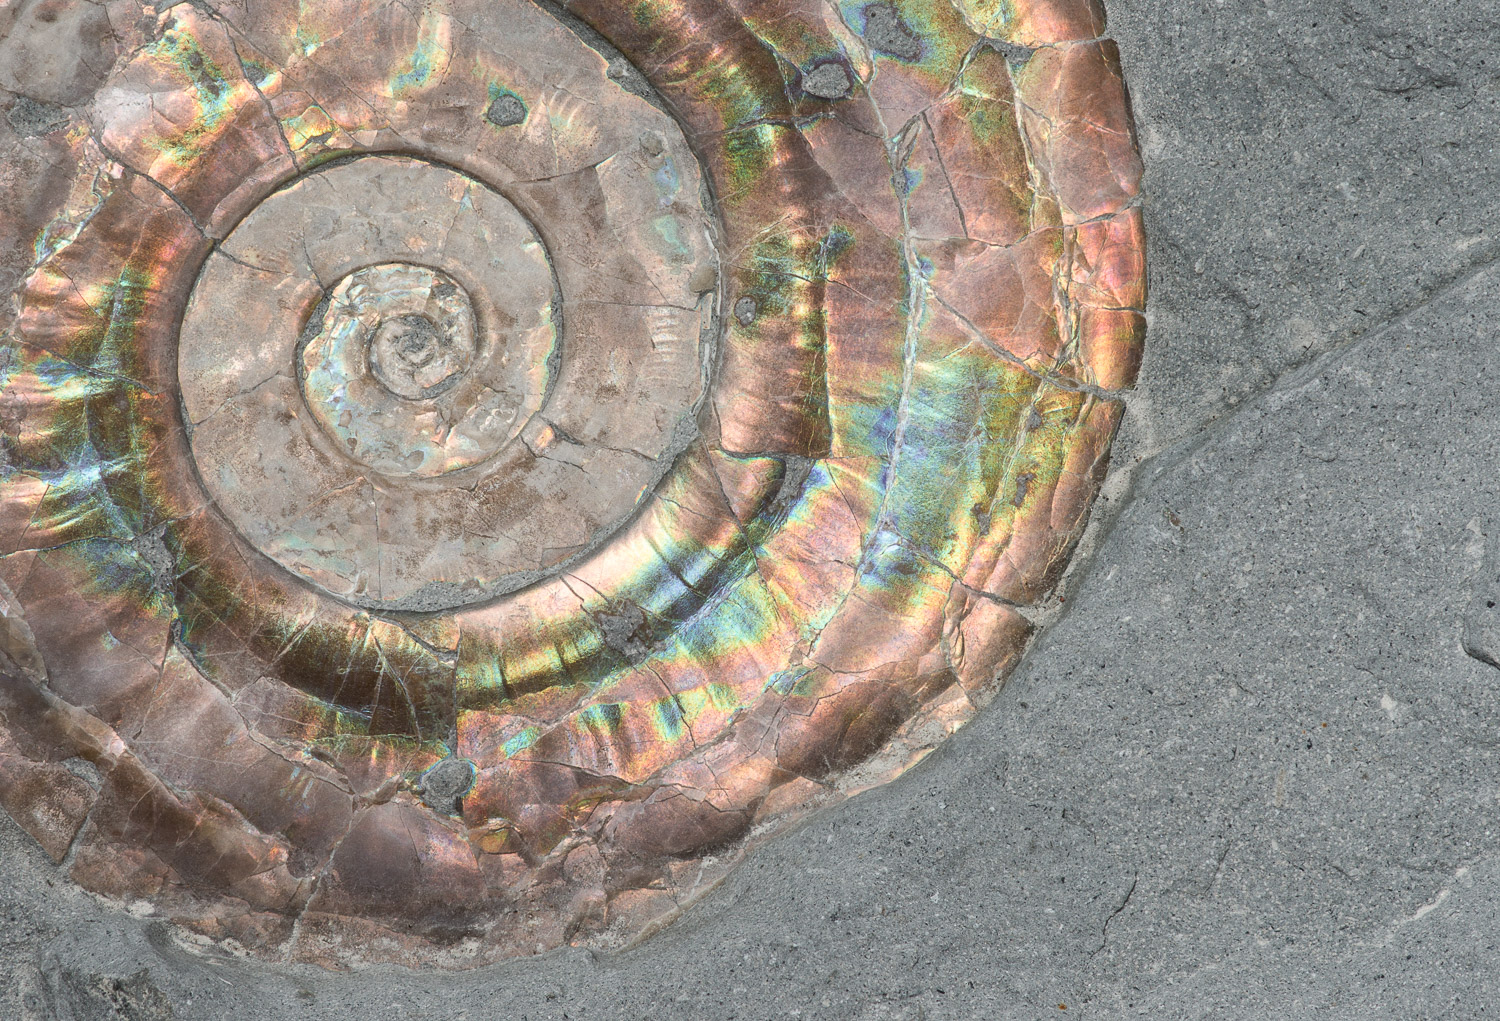 Iridescent shell of a Psiloceras planorbis ammonite fossil; Iridescence is the result of the geologic process of heat and pressure...